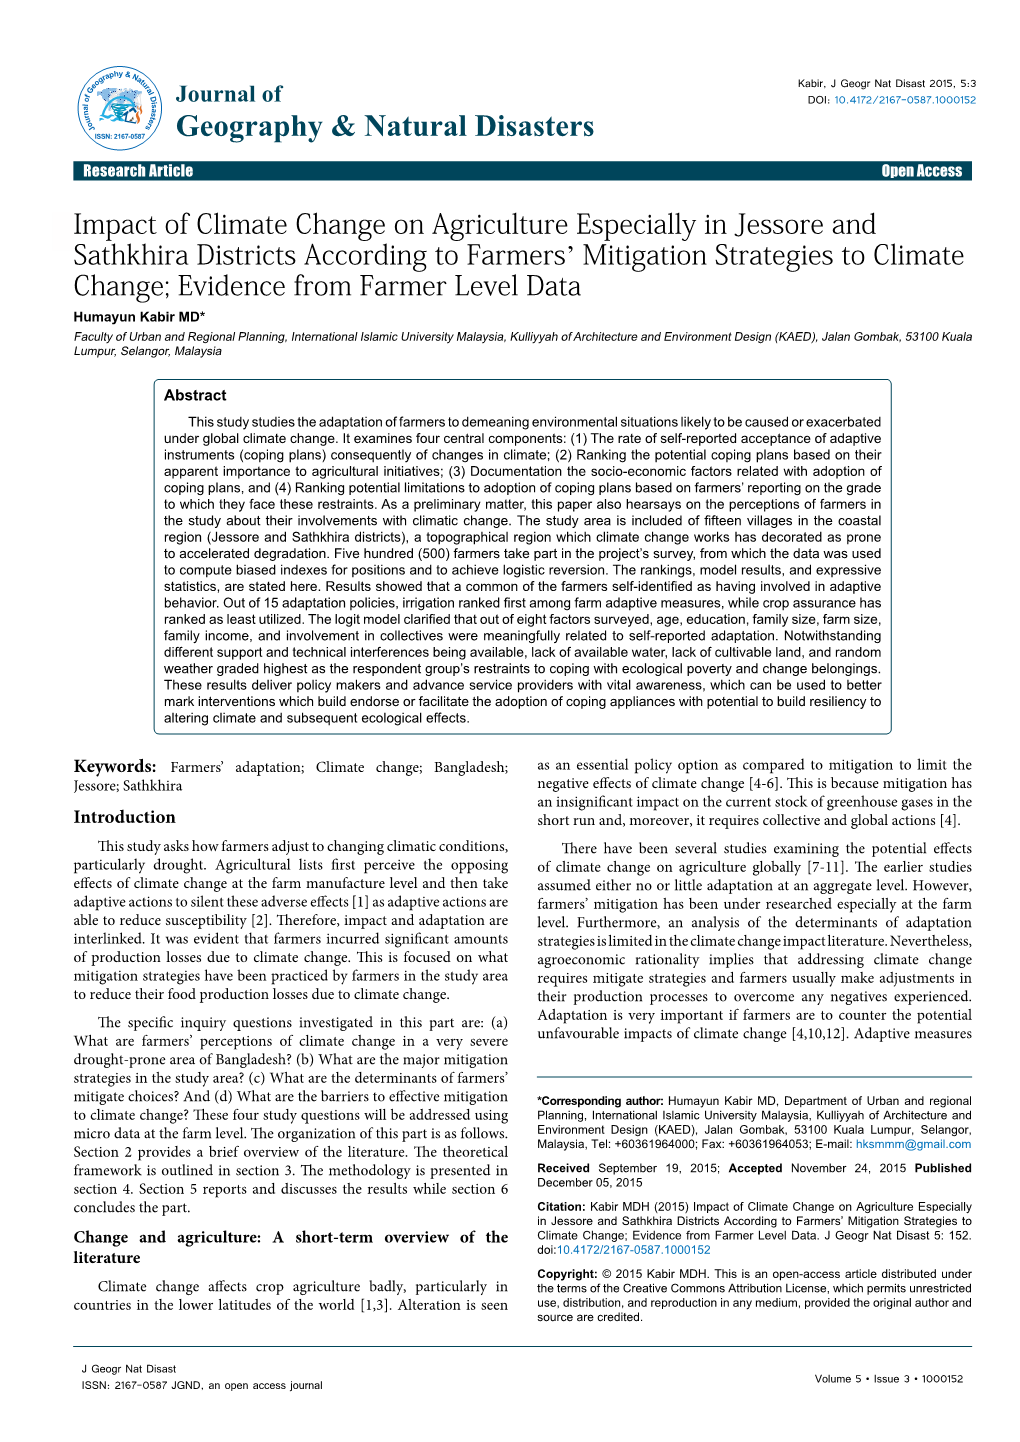 Impact of Climate Change on Agriculture Especially in Jessore